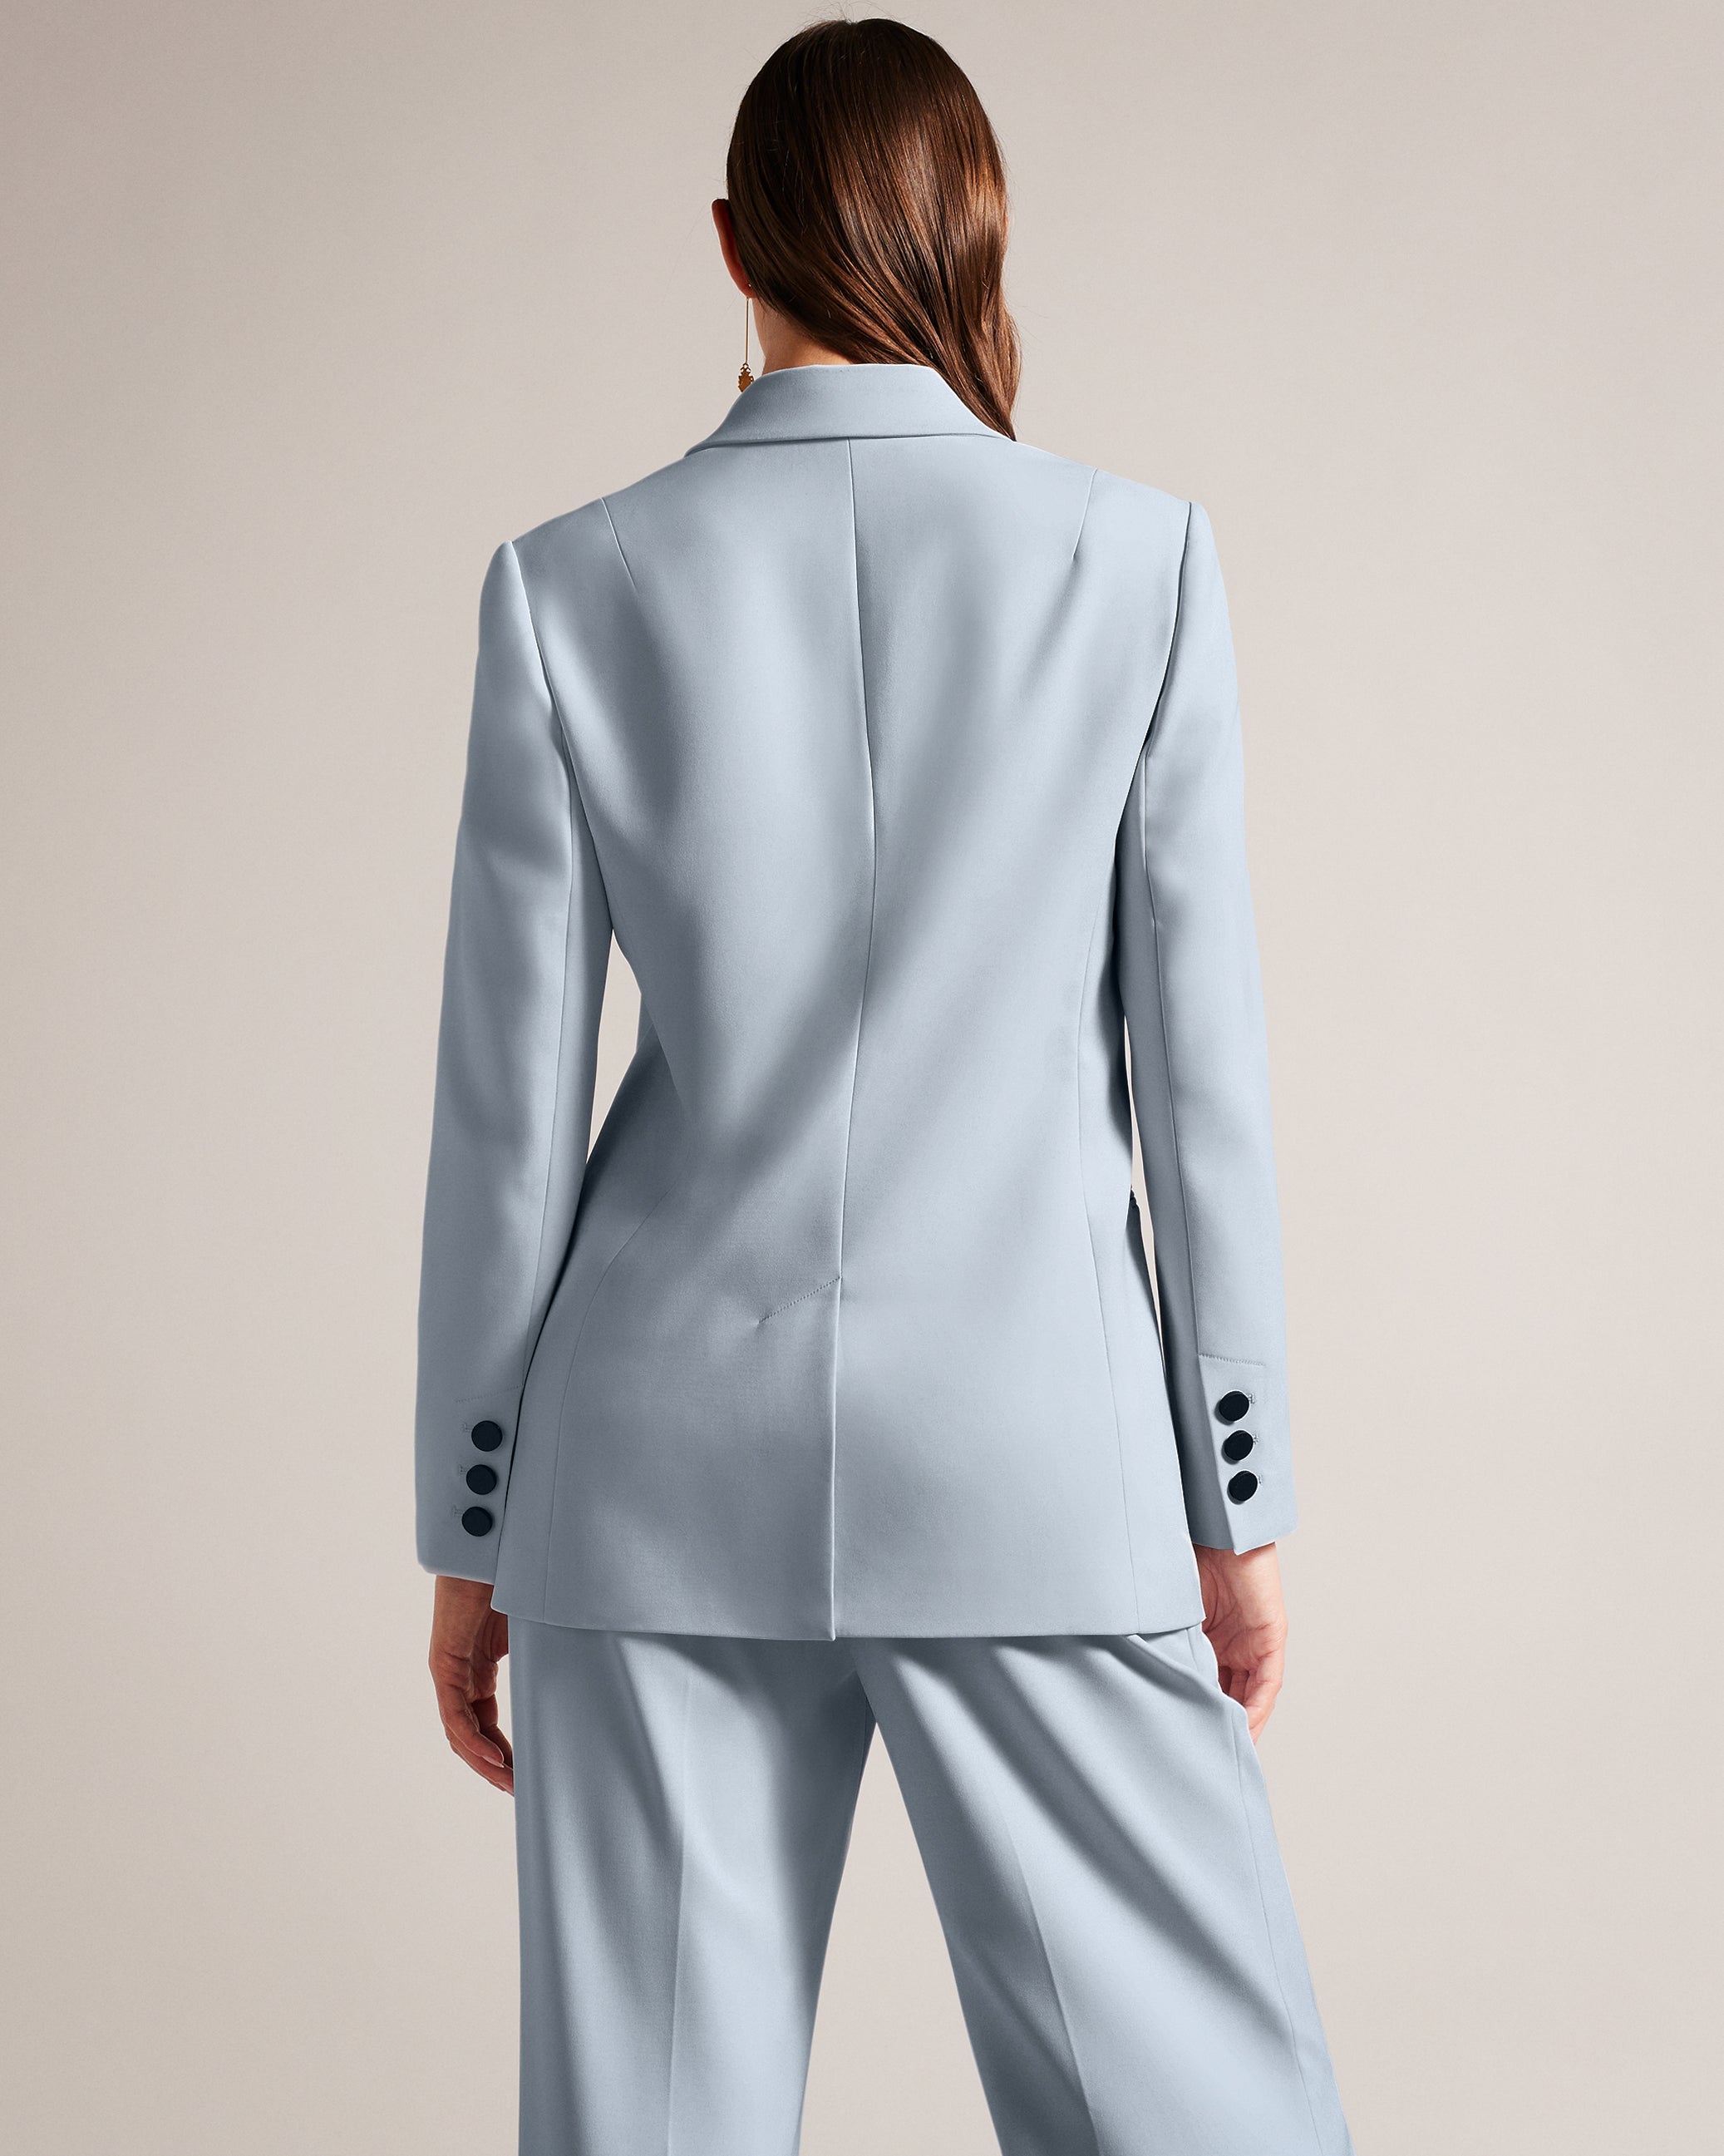 Hildia Long Line Double Breasted Jacket Baby-Blue